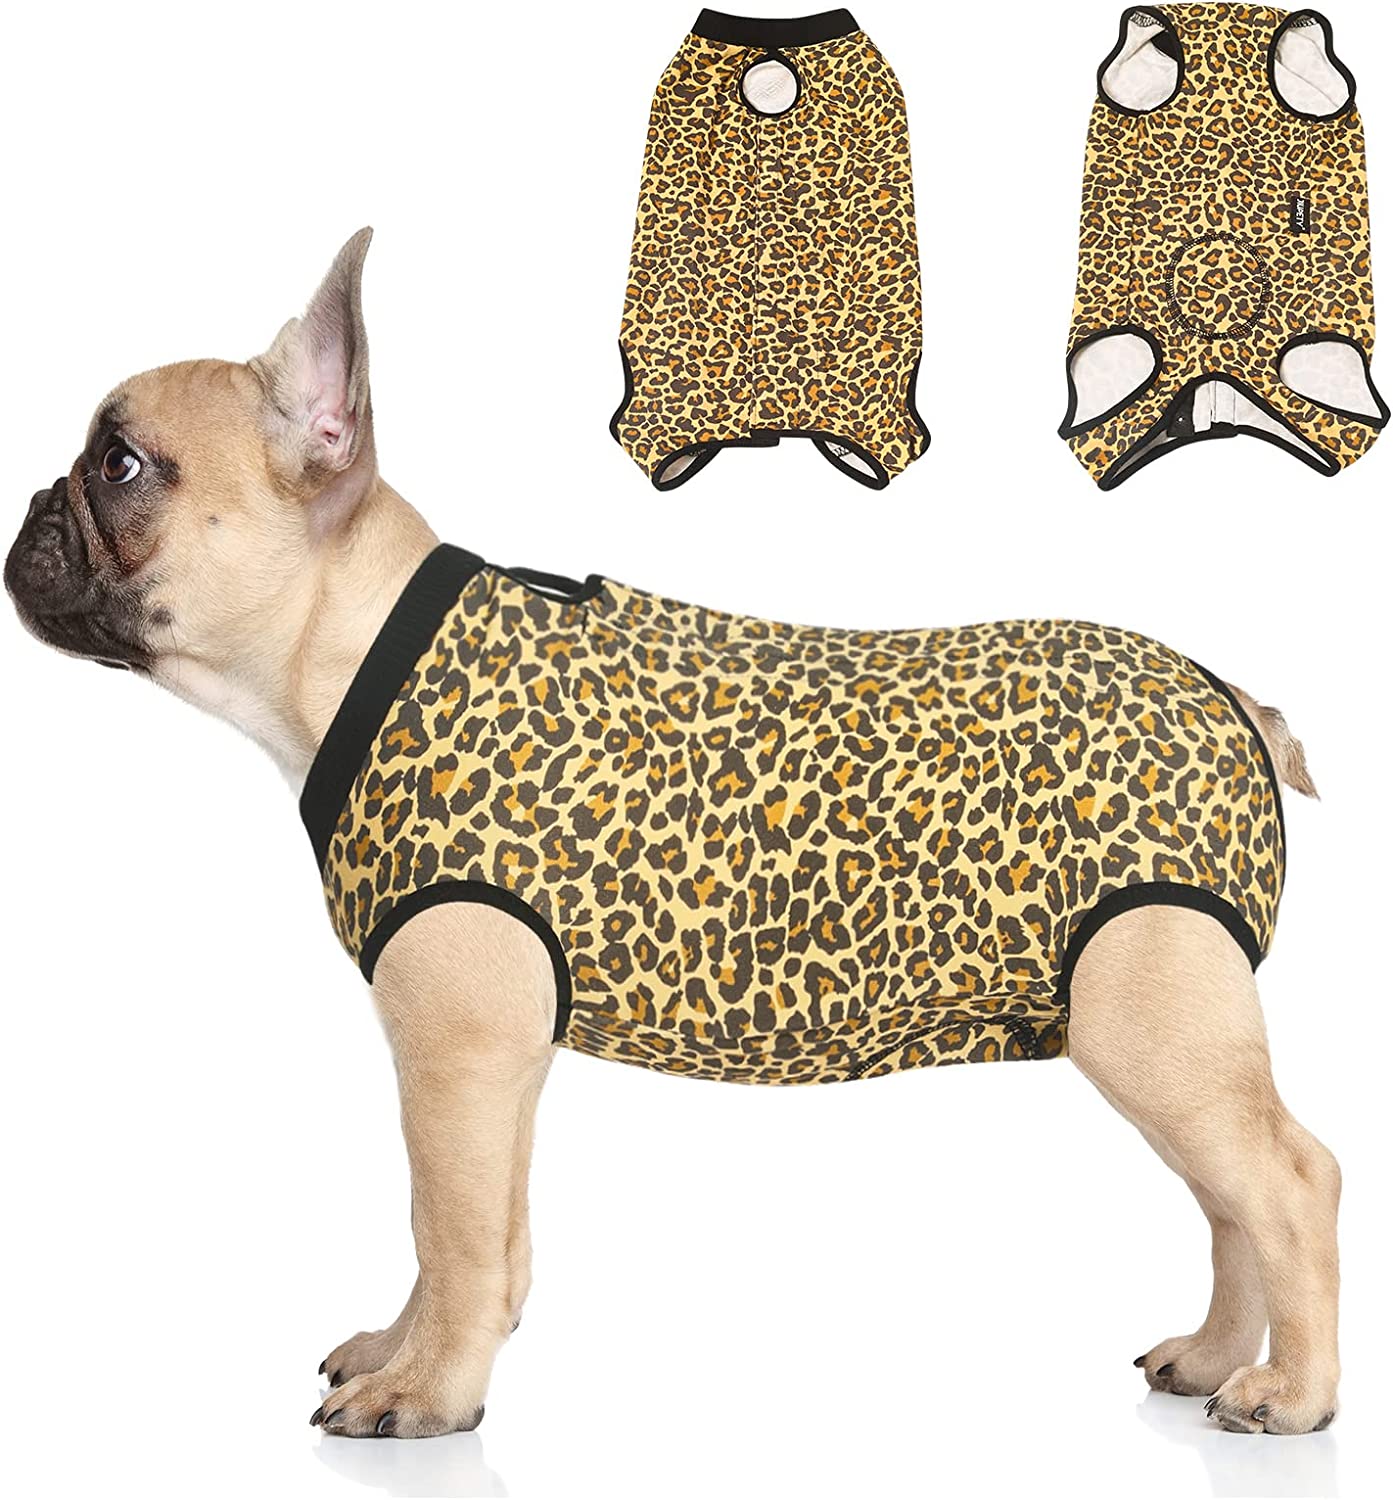 Dog Recovery Suit Adjustable, Dog Bodysuit for Abdominal Wound